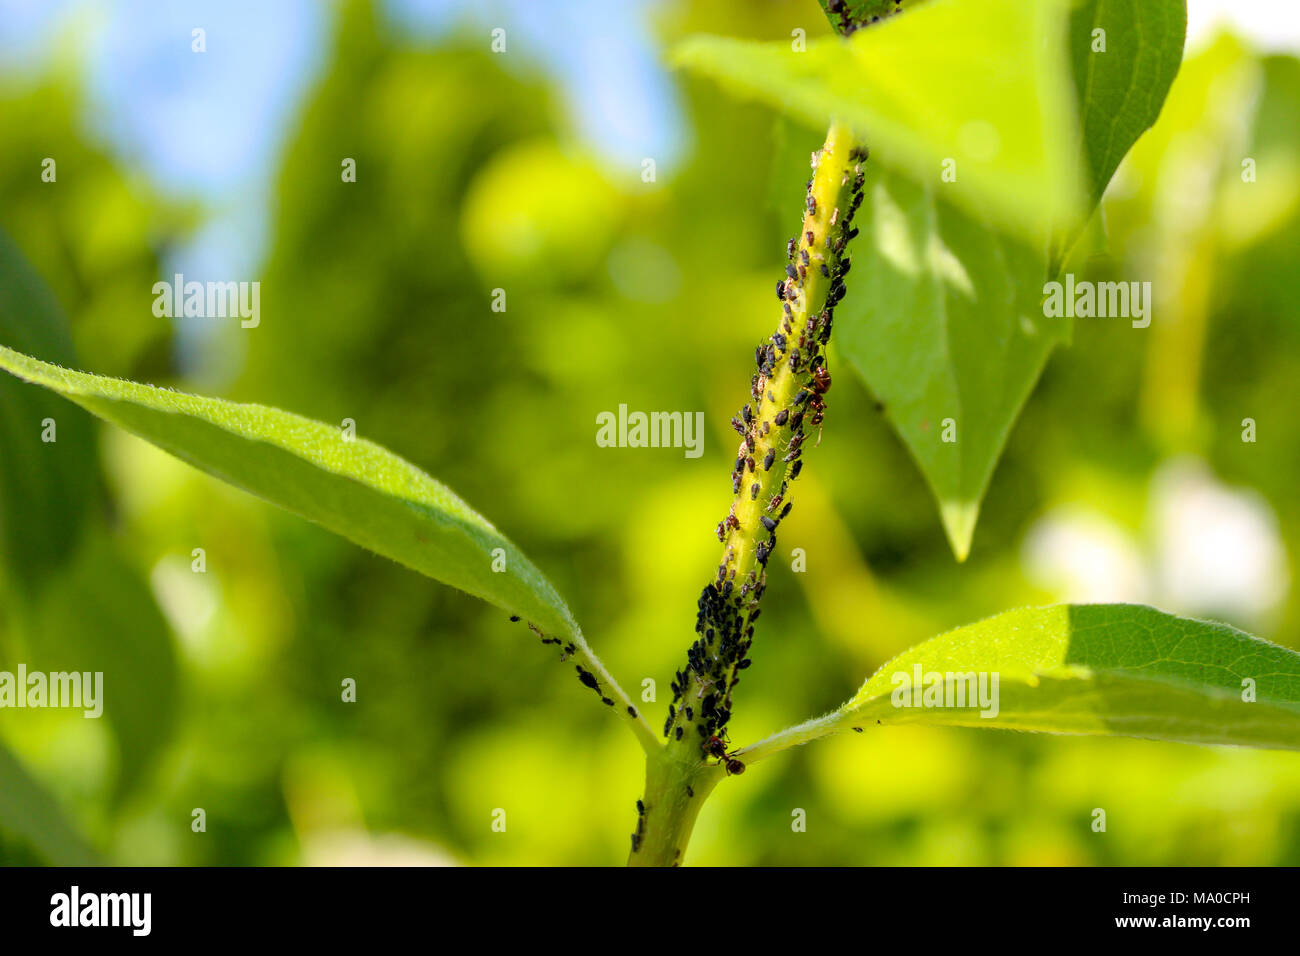 Plant infected by parasites, pests, insect infestation, in between ants, parasite prevention Stock Photo